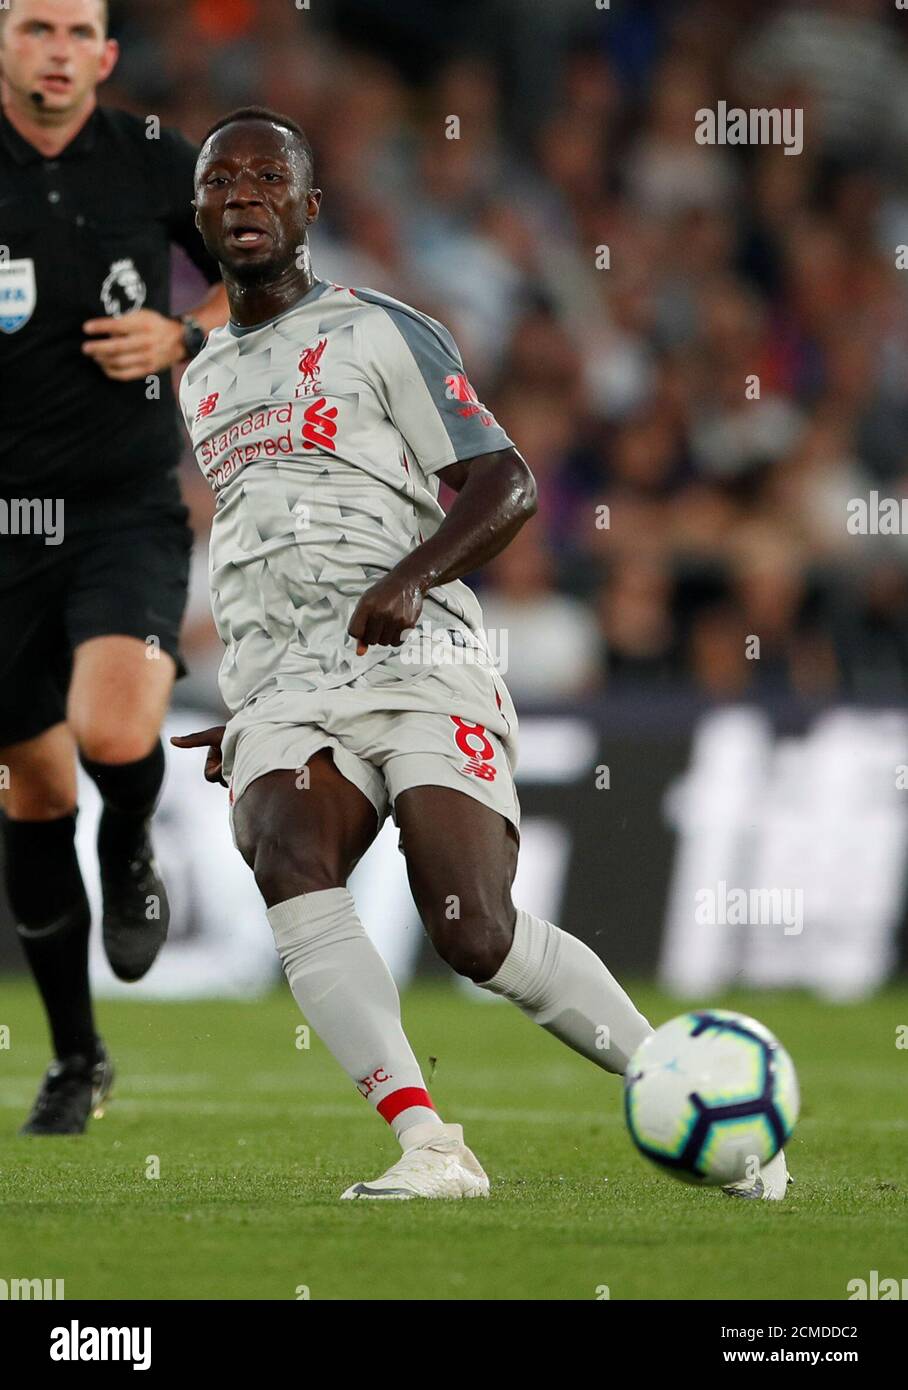 Soccer Football - Premier League - Crystal Palace v Liverpool - Selhurst Park, London, Britain - August 20, 2018 Liverpool's Naby Keita  Action Images via Reuters/John Sibley  EDITORIAL USE ONLY. No use with unauthorized audio, video, data, fixture lists, club/league logos or 'live' services. Online in-match use limited to 75 images, no video emulation. No use in betting, games or single club/league/player publications.  Please contact your account representative for further details. Stock Photo